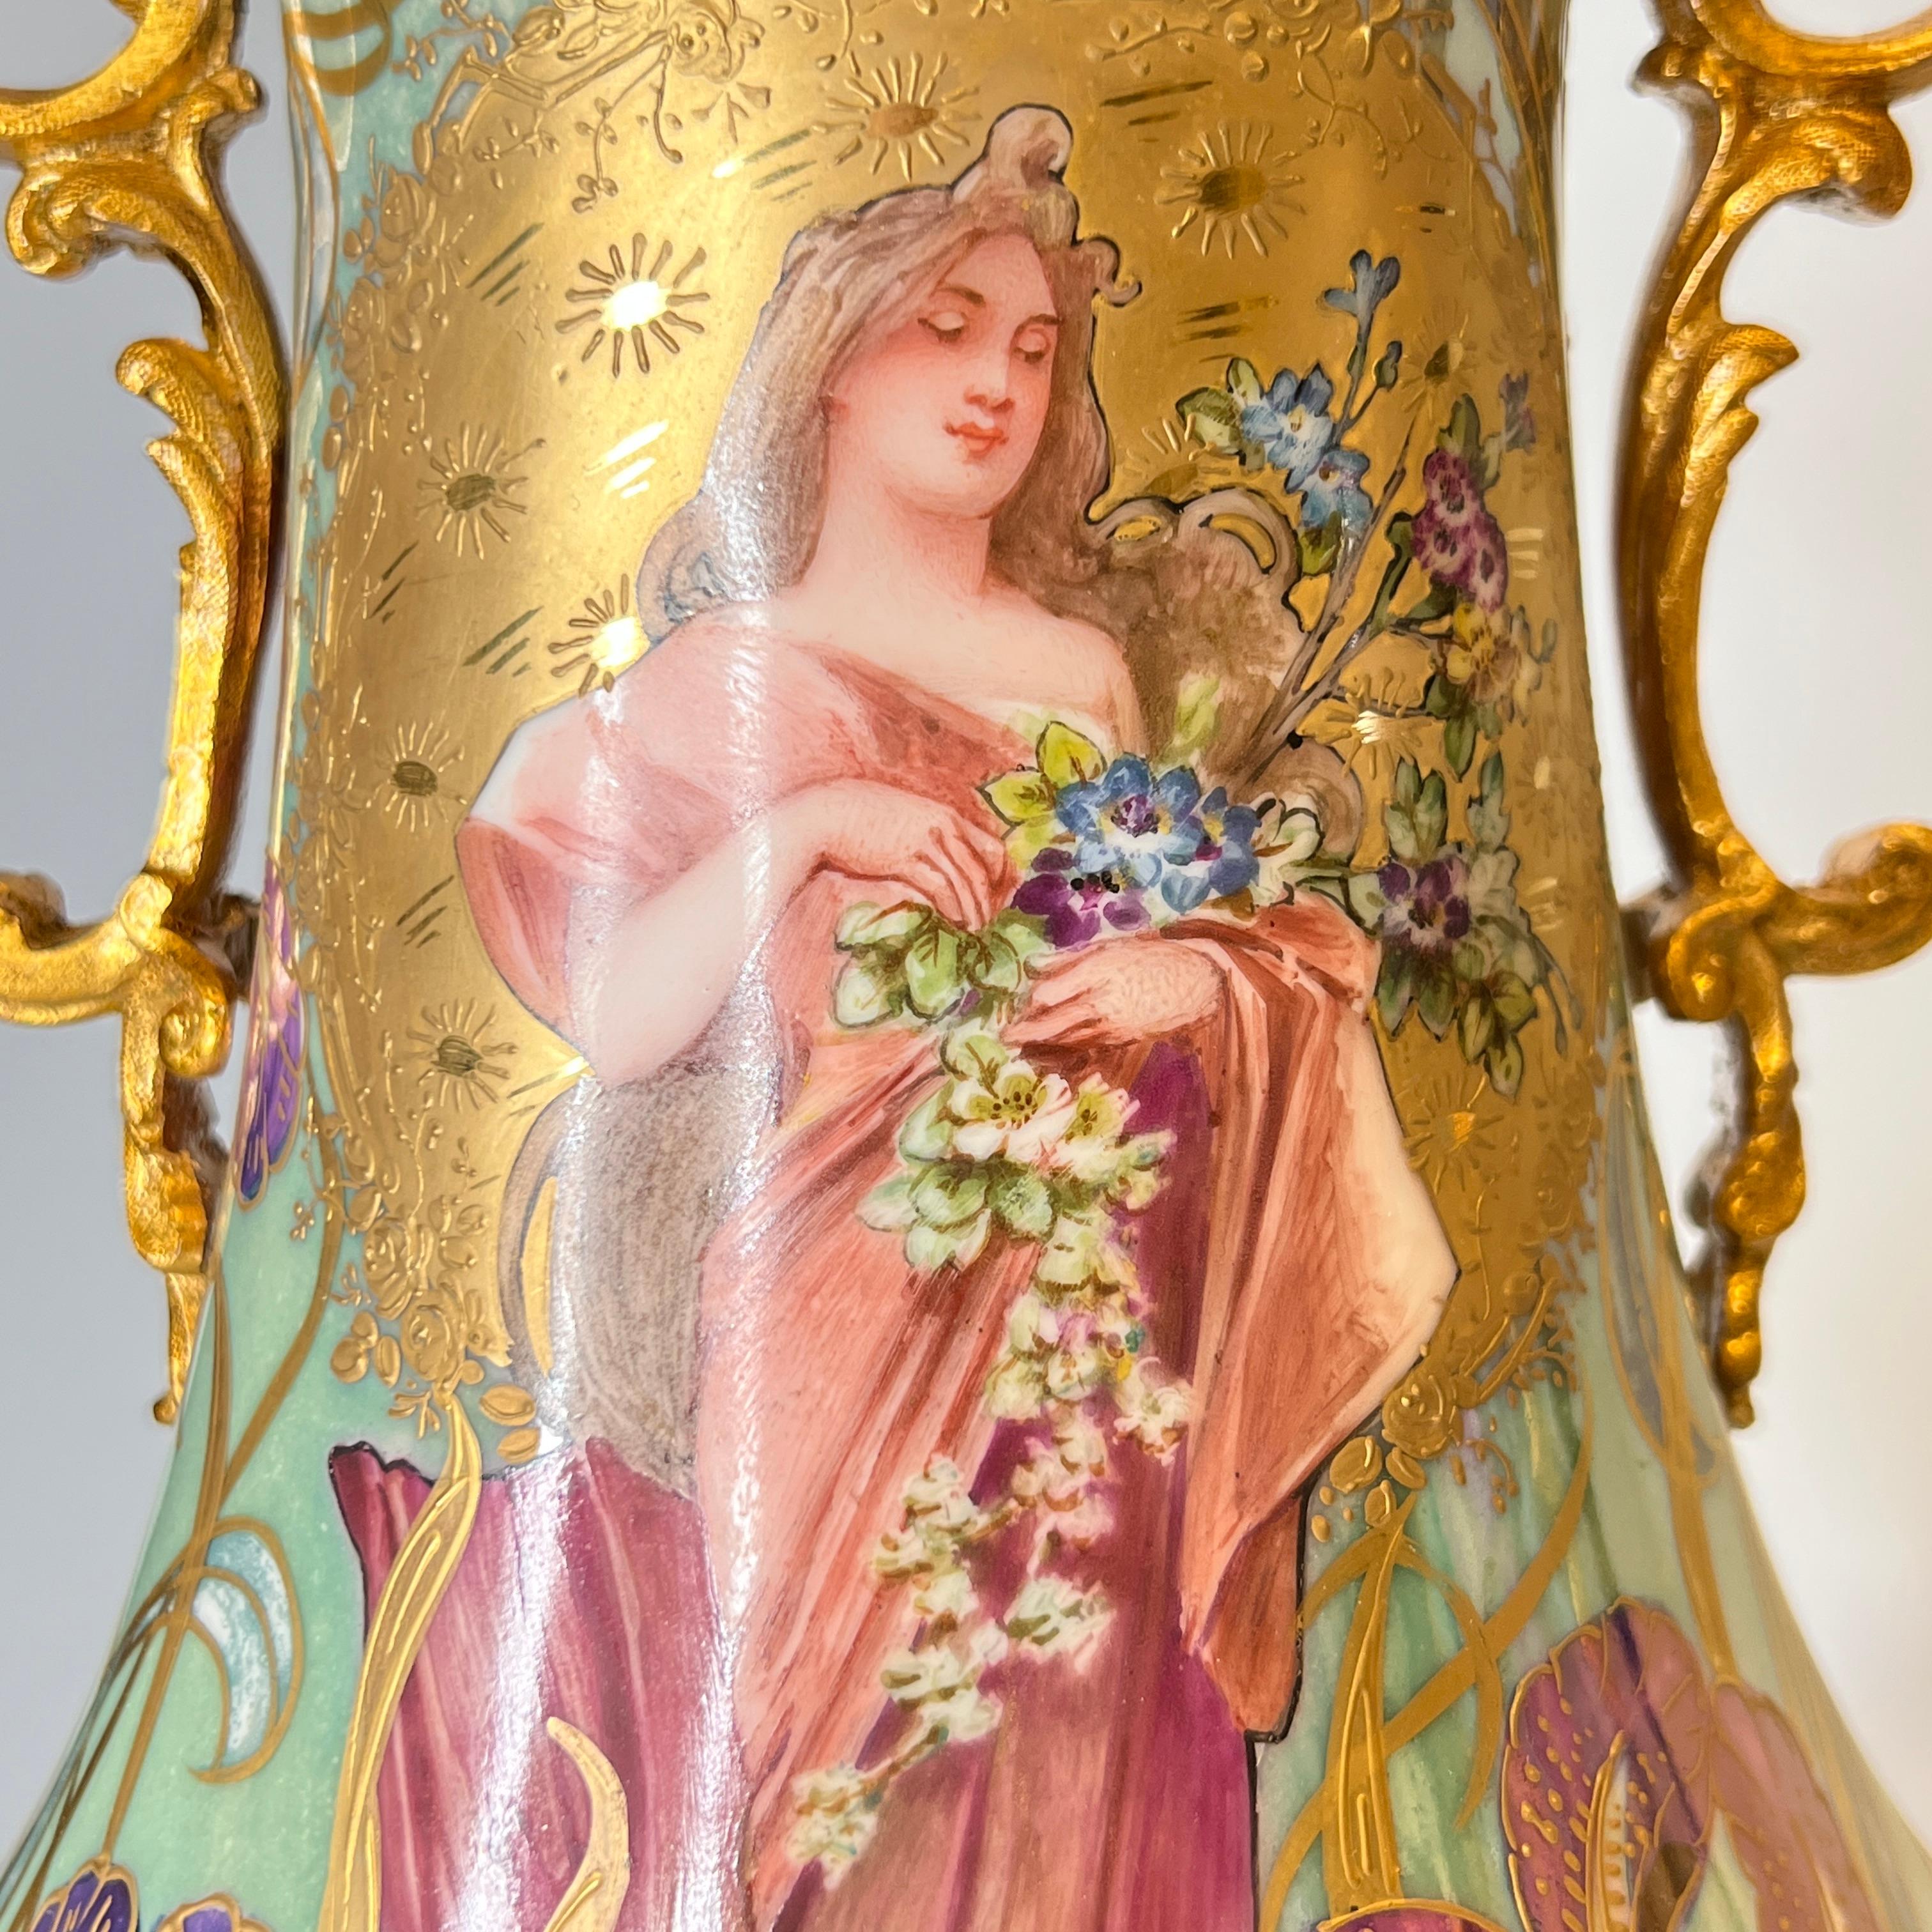 Gilt Pair of Art Nouveau Sevres Style Iridescent Porcelain Vases and Covers by Lheri For Sale